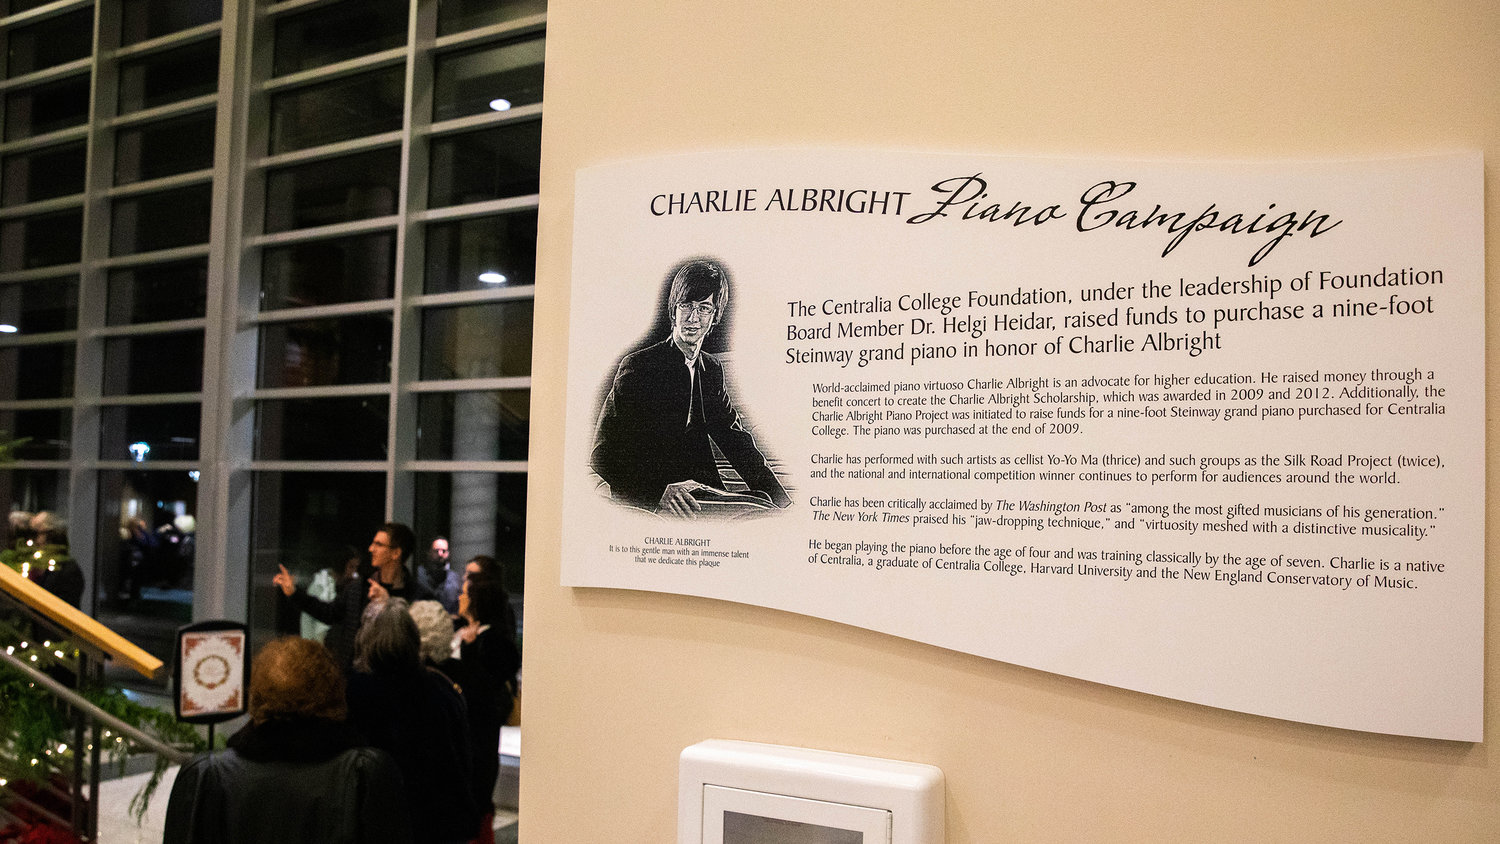 The Centralia College Foundation, under the leadership go Foundation Board Member Dr. Helgi Heidar, raised funds in 2009 to purchase a nine-foot Steinway grand piano in honor of Charlie Albright.